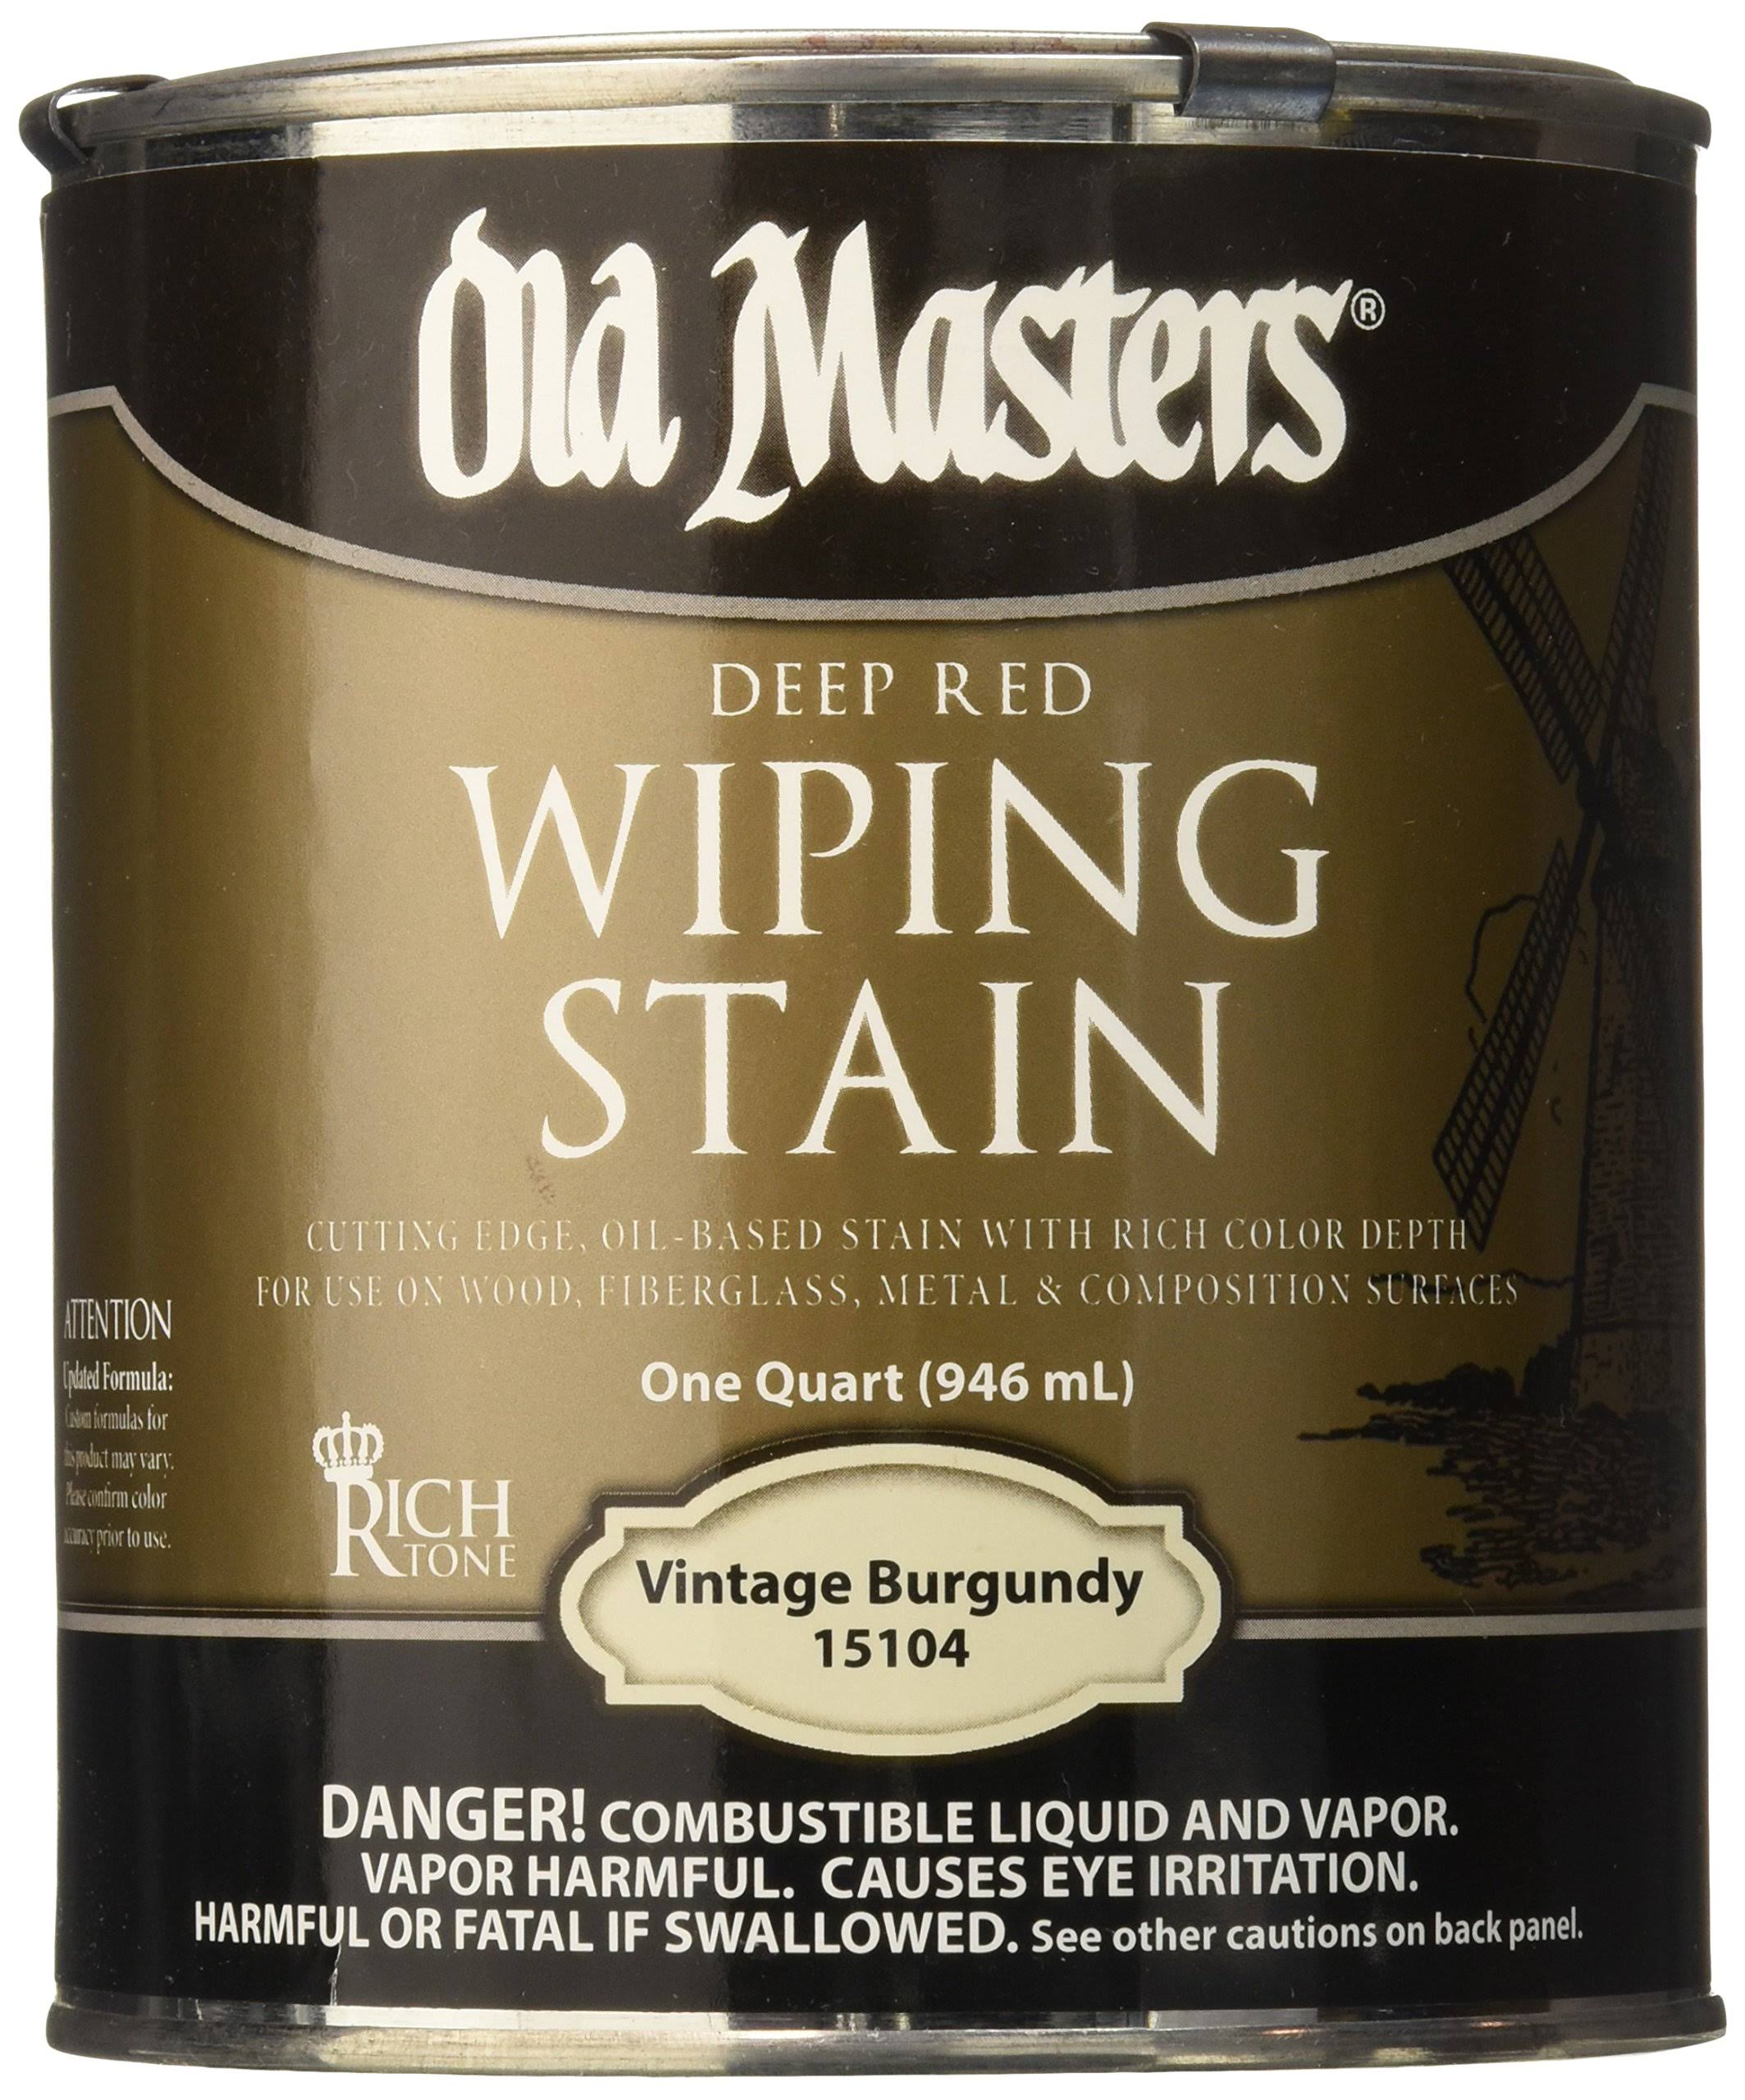 Old Masters Deep Red Wiping Stain - Vintage Burgundy, 1 qt